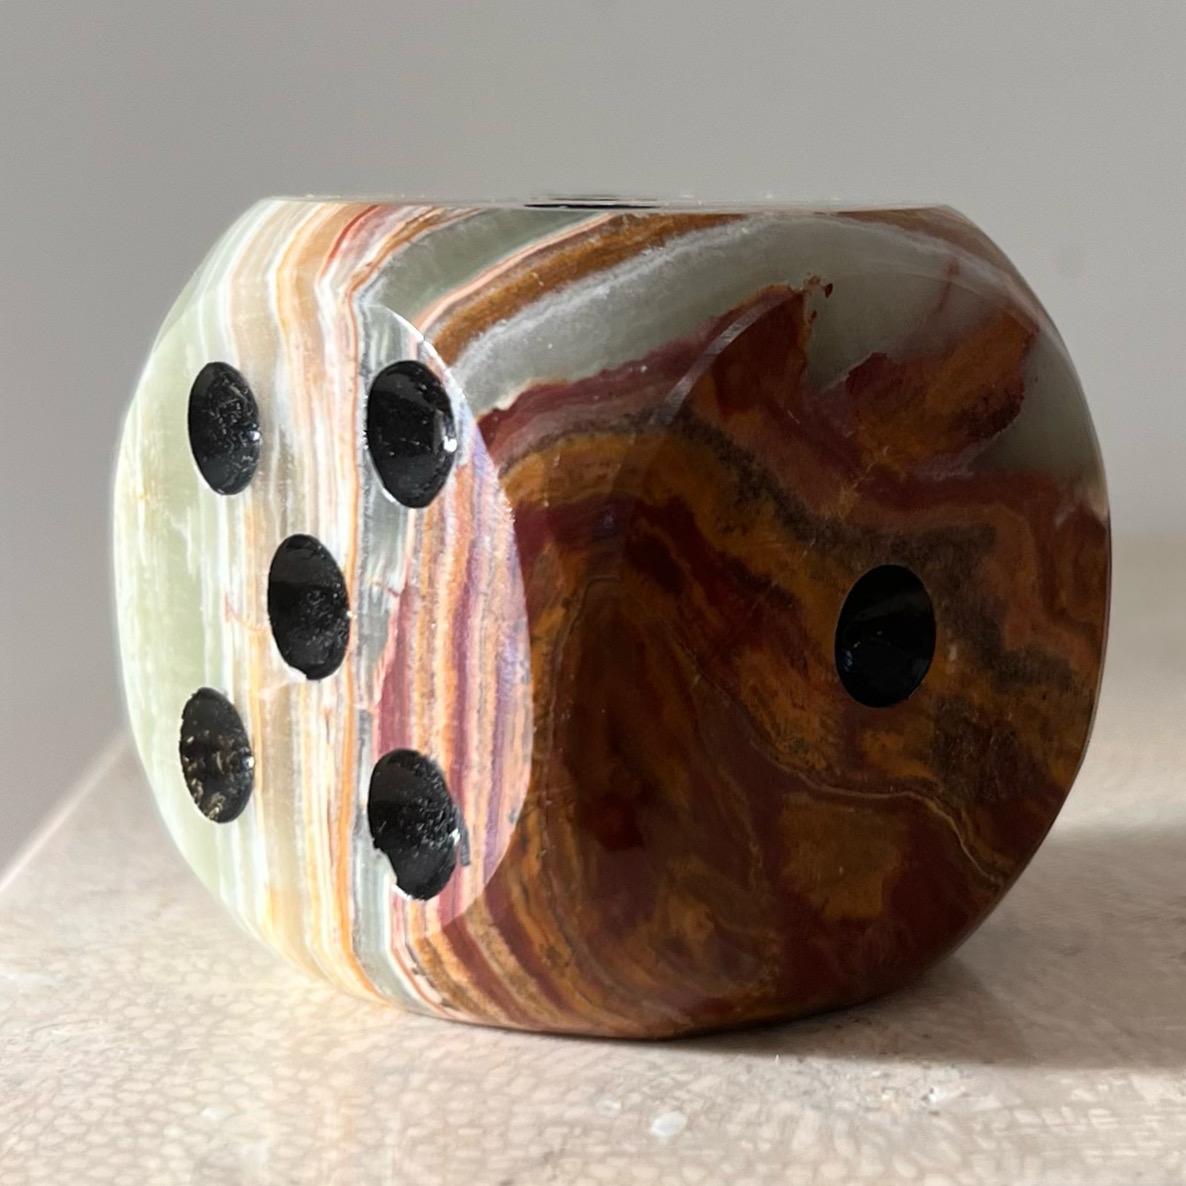 A vintage hand-carved “die” (dice) objet d’art / paperweight, hand-carved from onyx in Italy circa early 1960s. Tones of pistachio, rust, and eggshell. A unique and rare memento of marble art work that was flourishing in the mid 20th century Italy. 